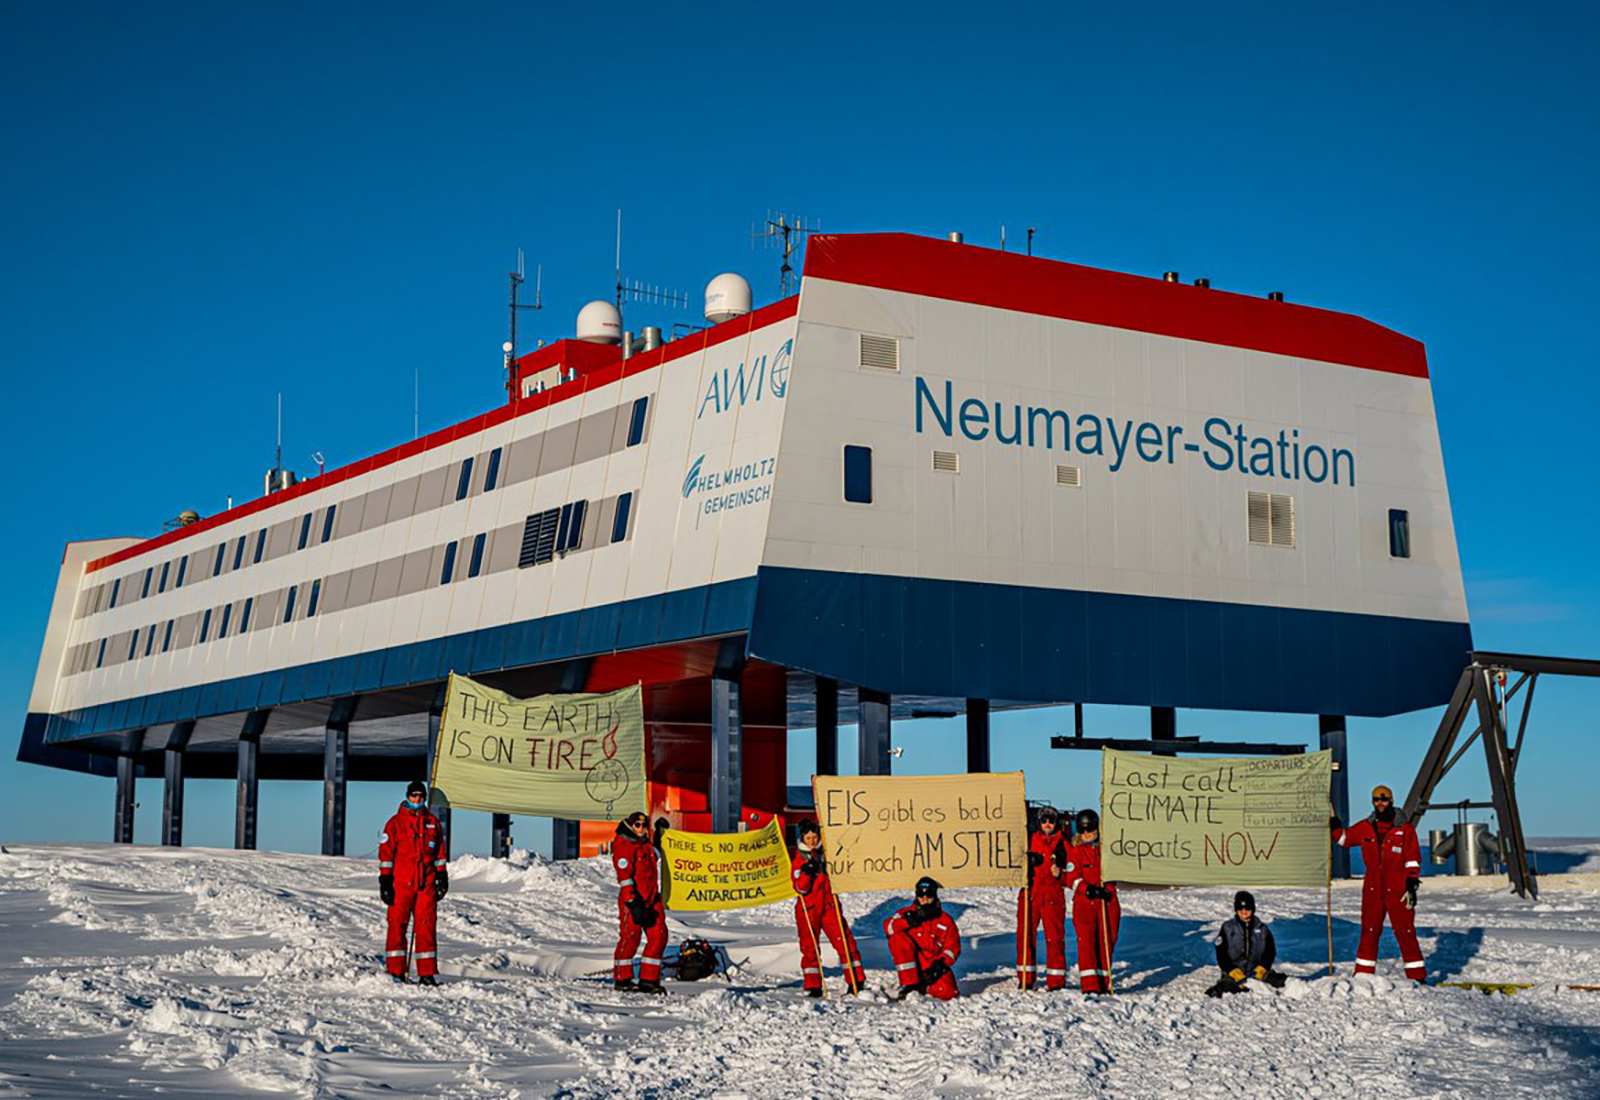 8 people in red snow suits holding signs protesting climate change in front of station in Antarctica